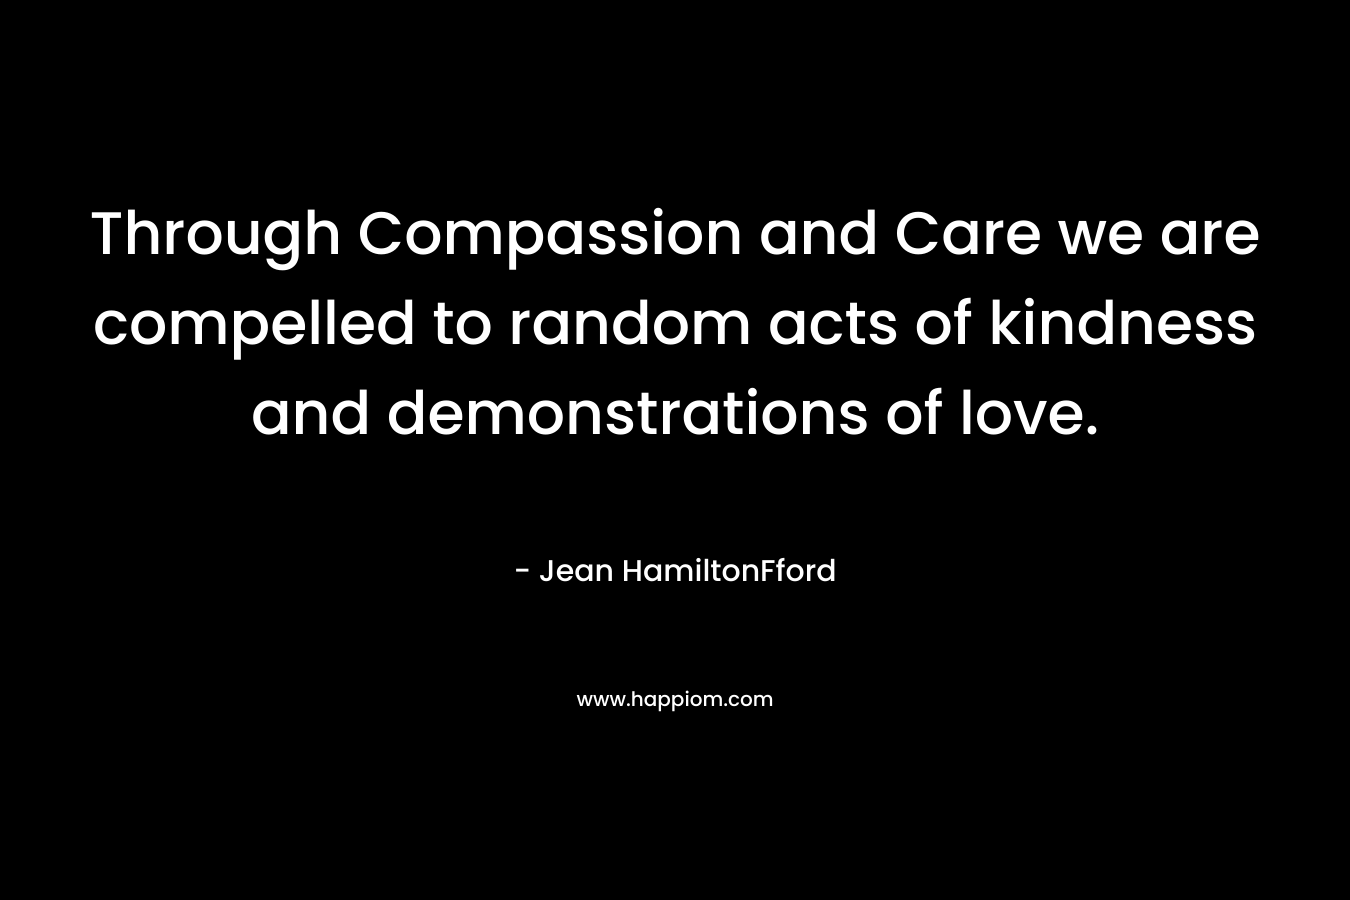 Through Compassion and Care we are compelled to random acts of kindness and demonstrations of love.